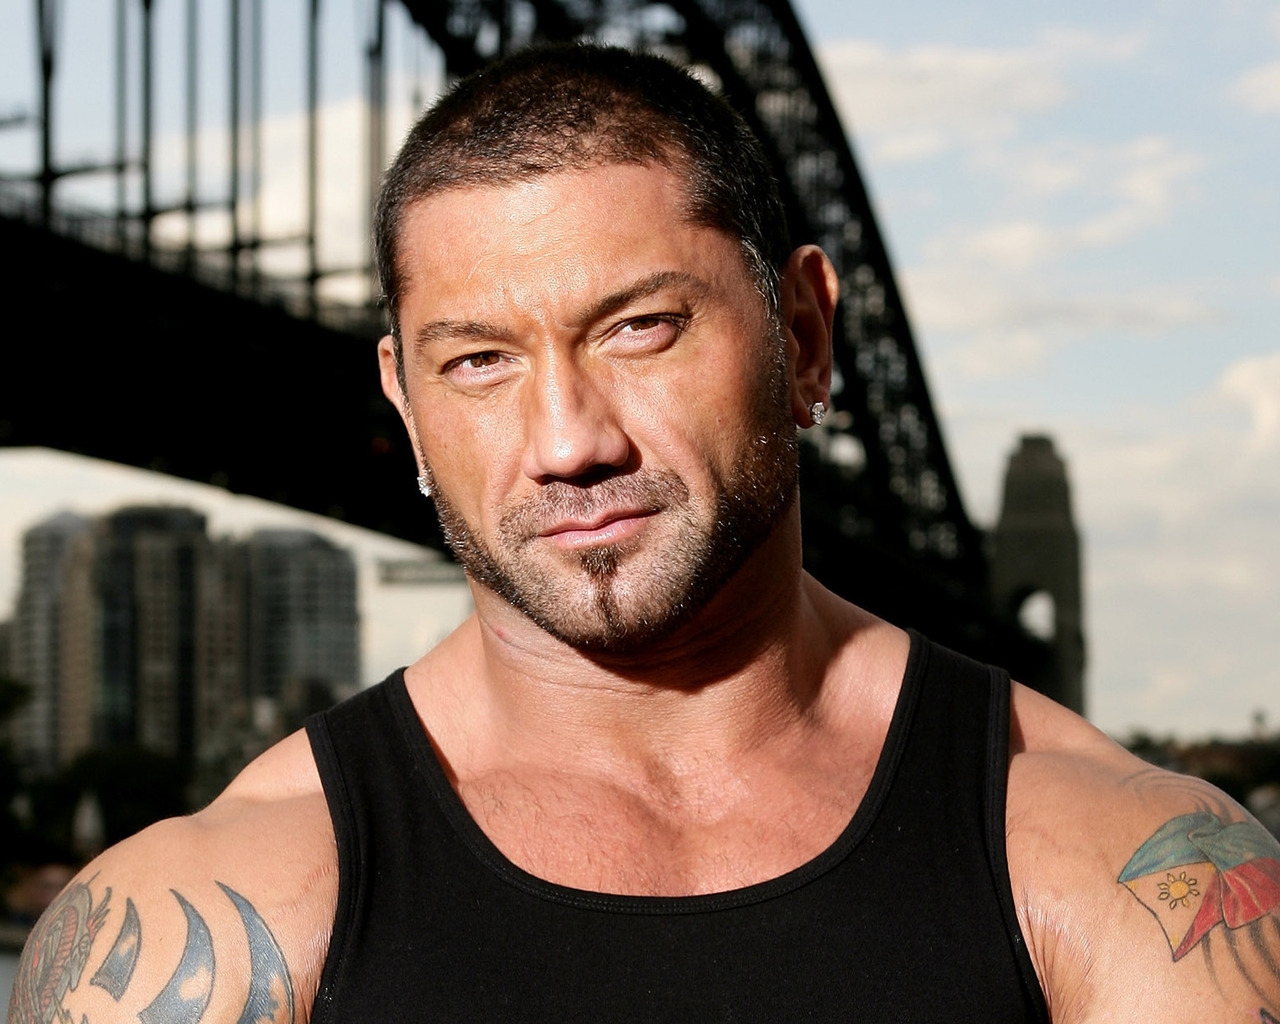 Dave Bautista for 1280 x 1024 resolution